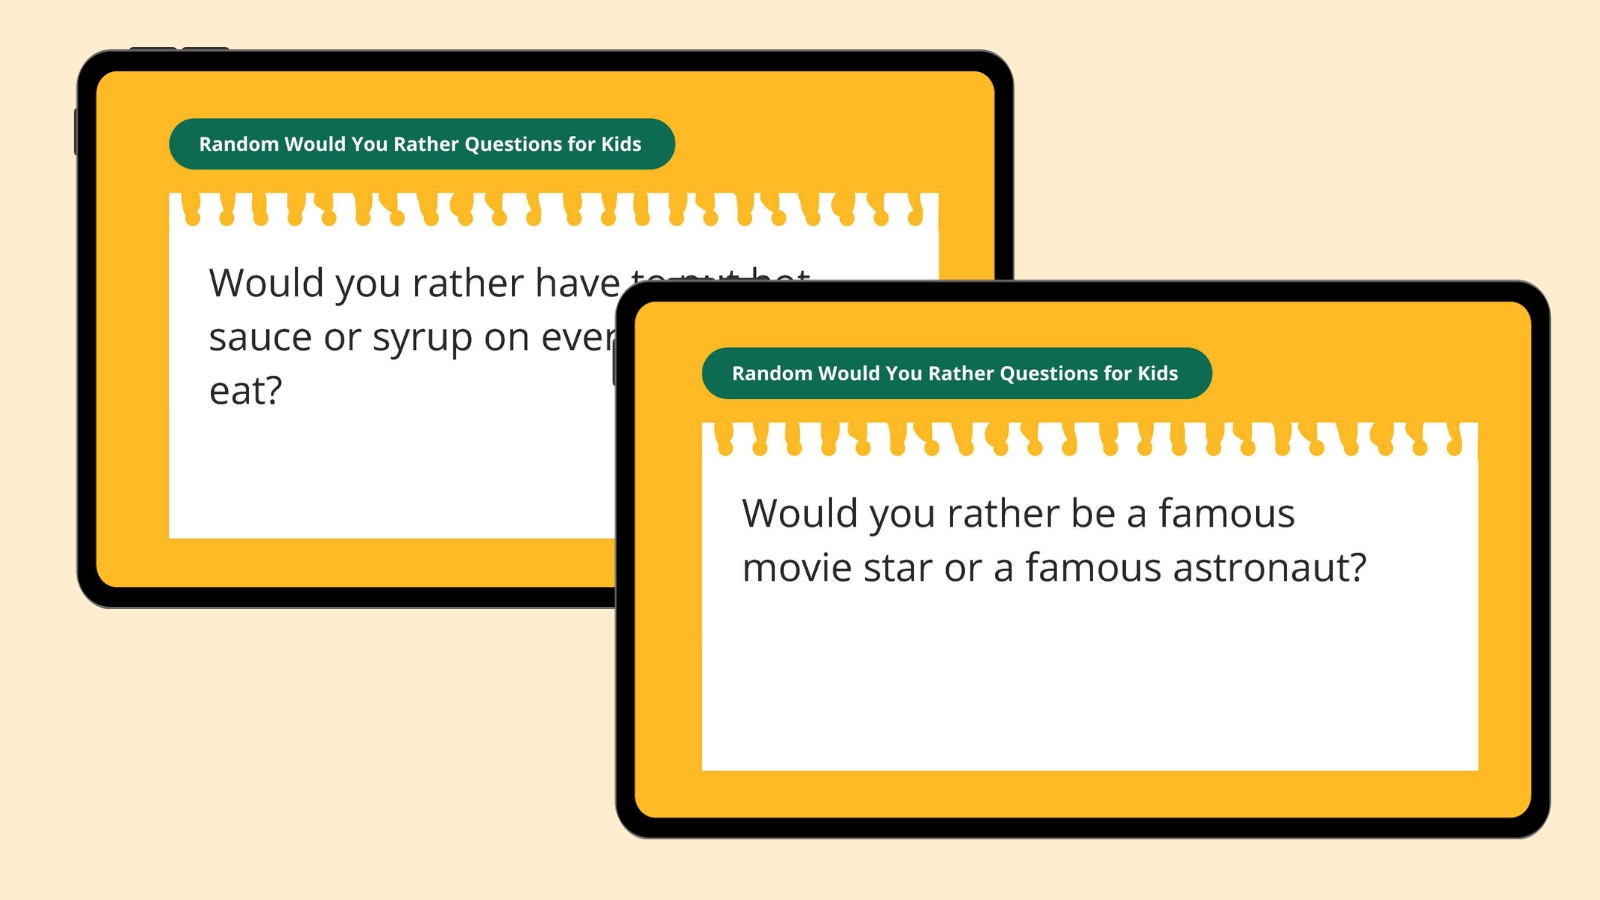 Would you rather be a famous movie star or a famous astronaut?